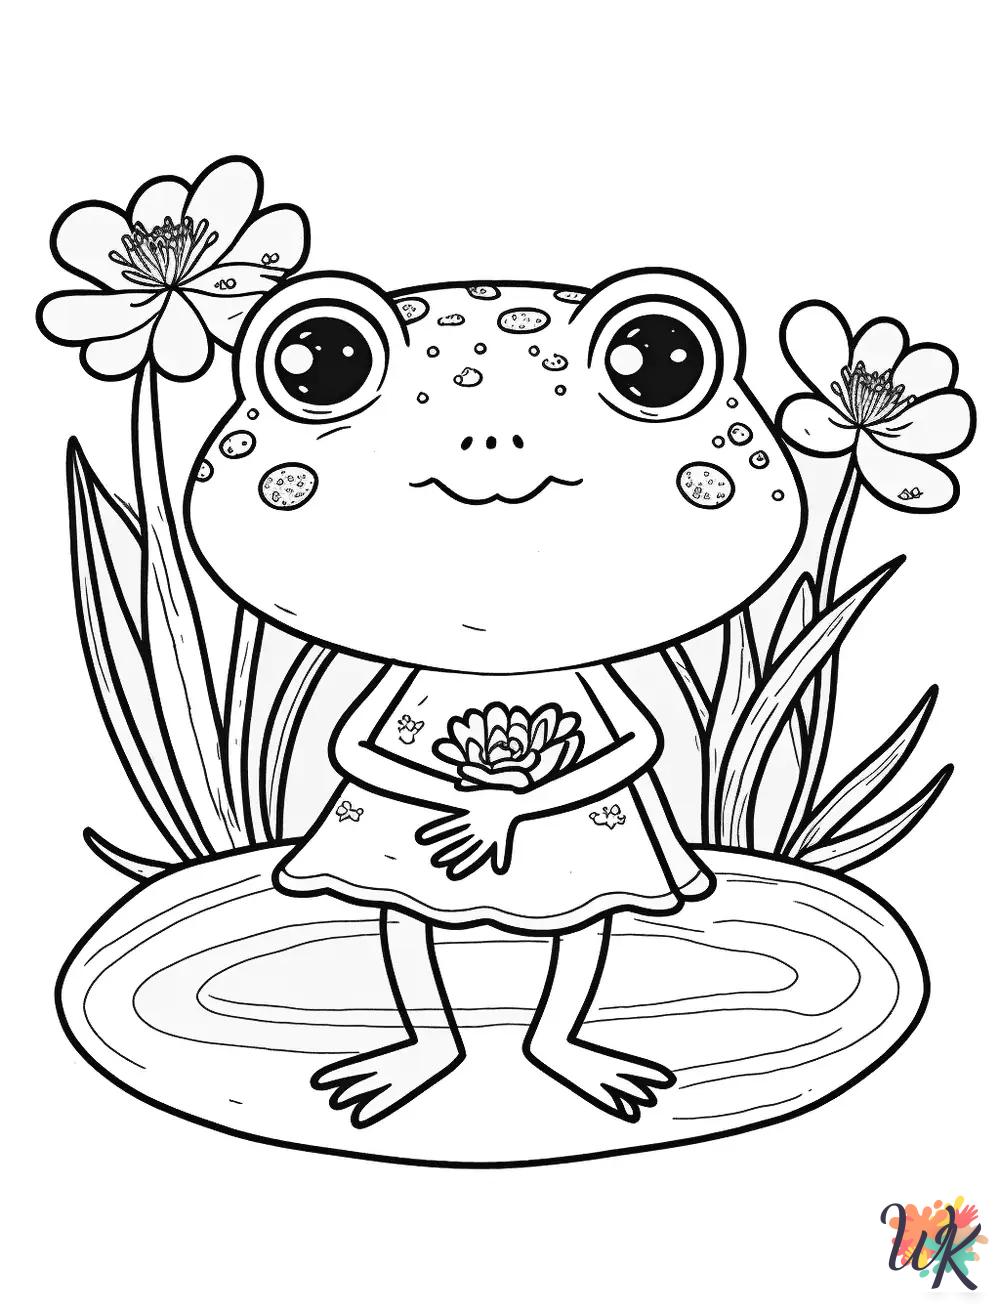 Frog adult coloring pages